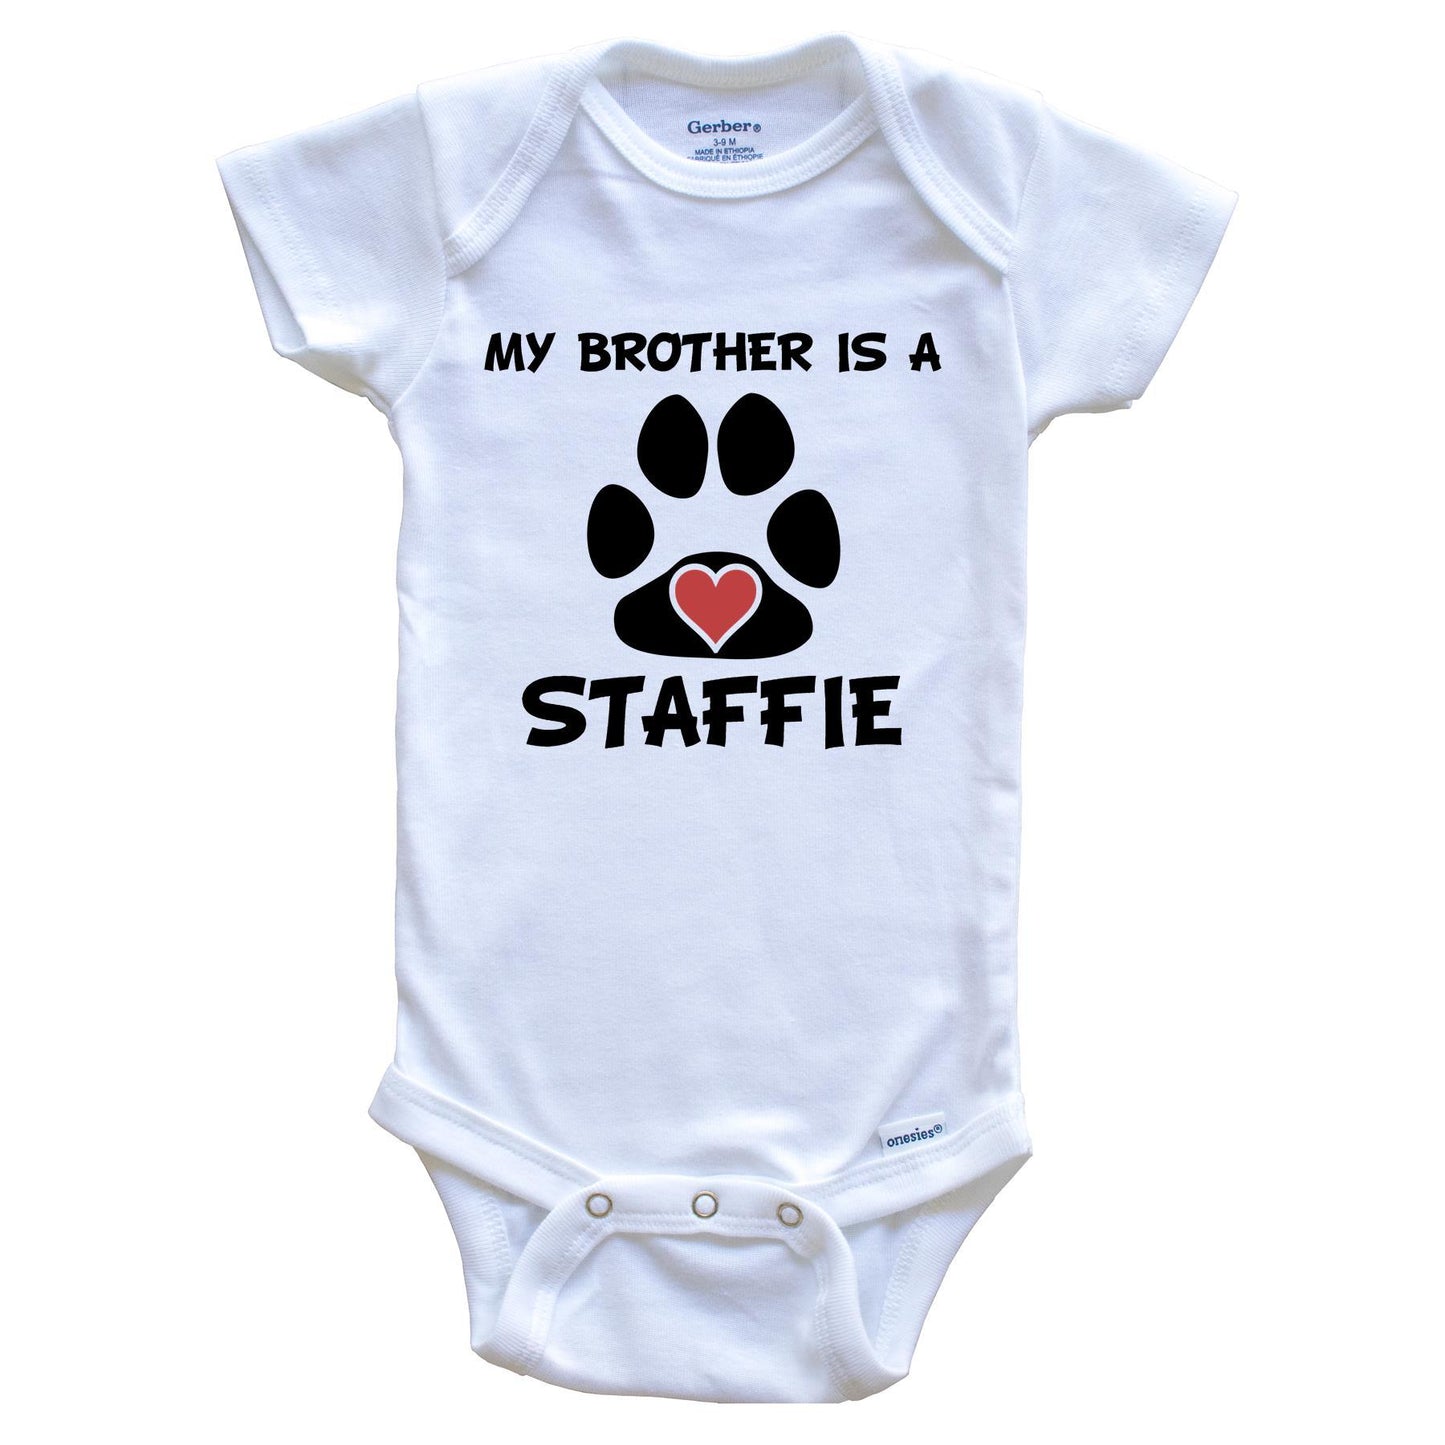 My Brother Is A Staffie Baby Onesie